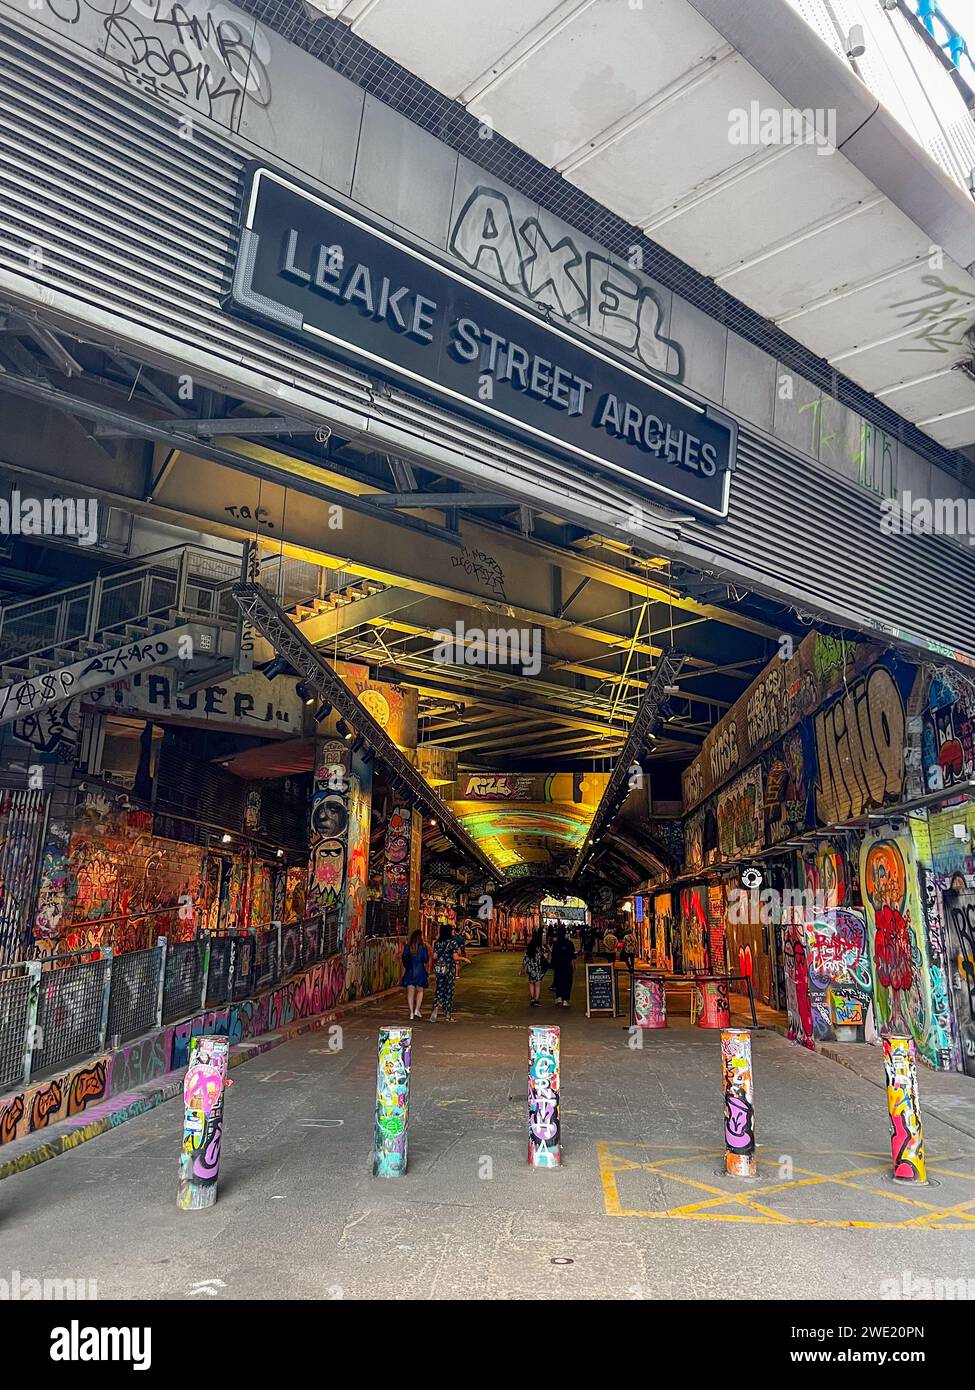 Southbank London, England, UK - Aug 27, 2022: Leake Street Arches is a series of tunnels where visitors can paint, dine, or shop. Stock Photo